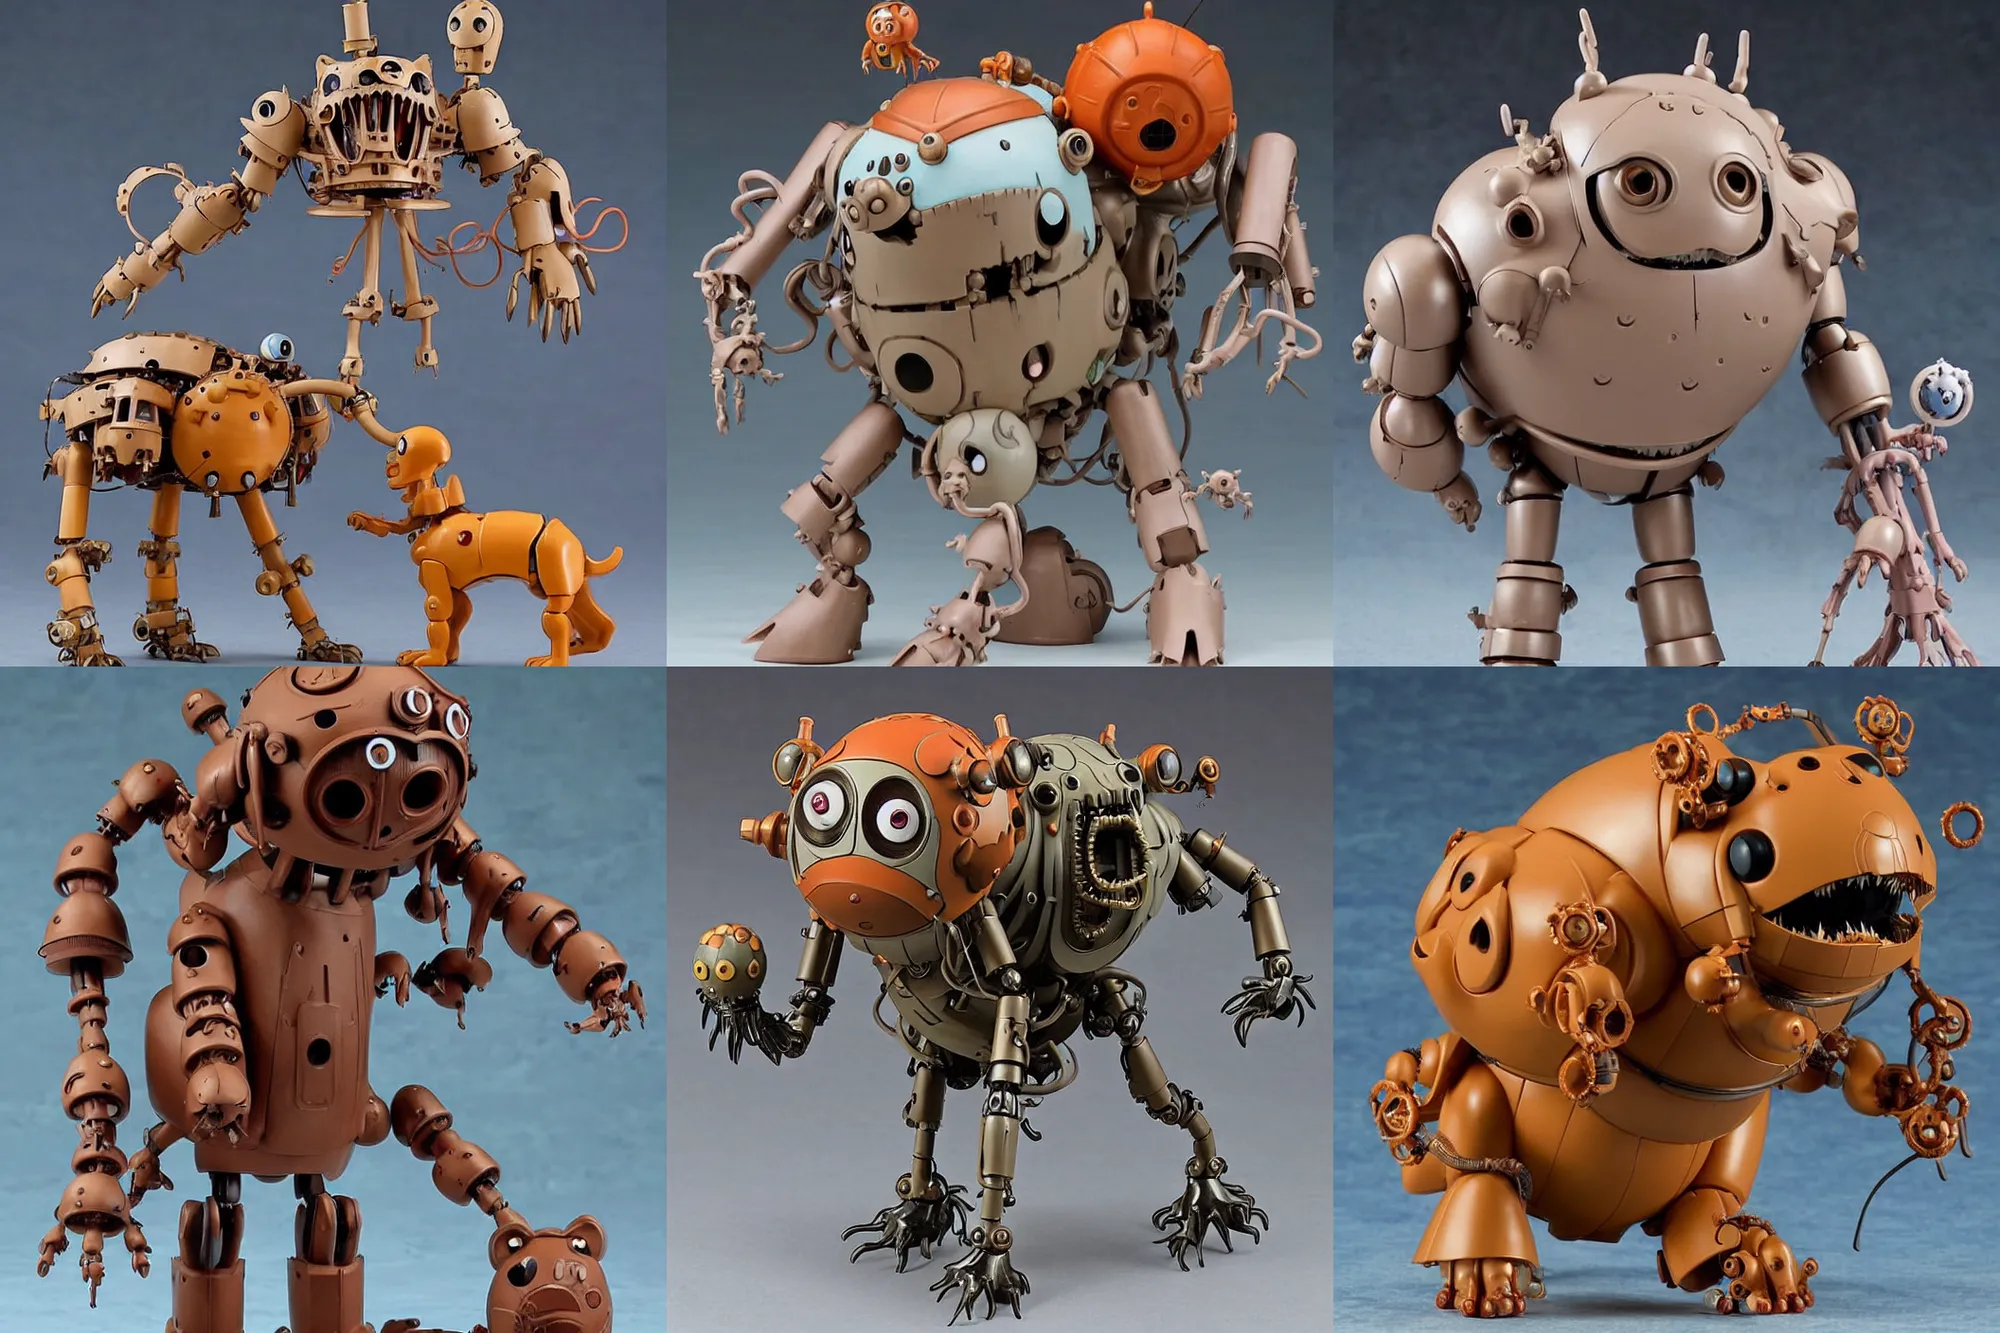 Prompt: A scary Lovecraftian giant mechanized adorable puppy from Studio Ghibli Howl's Moving Castle (2004) as a 1980's Kenner style action figure, 5 points of articulation, full body, 4k, highly detailed. award winning sci-fi. look at all that detail!